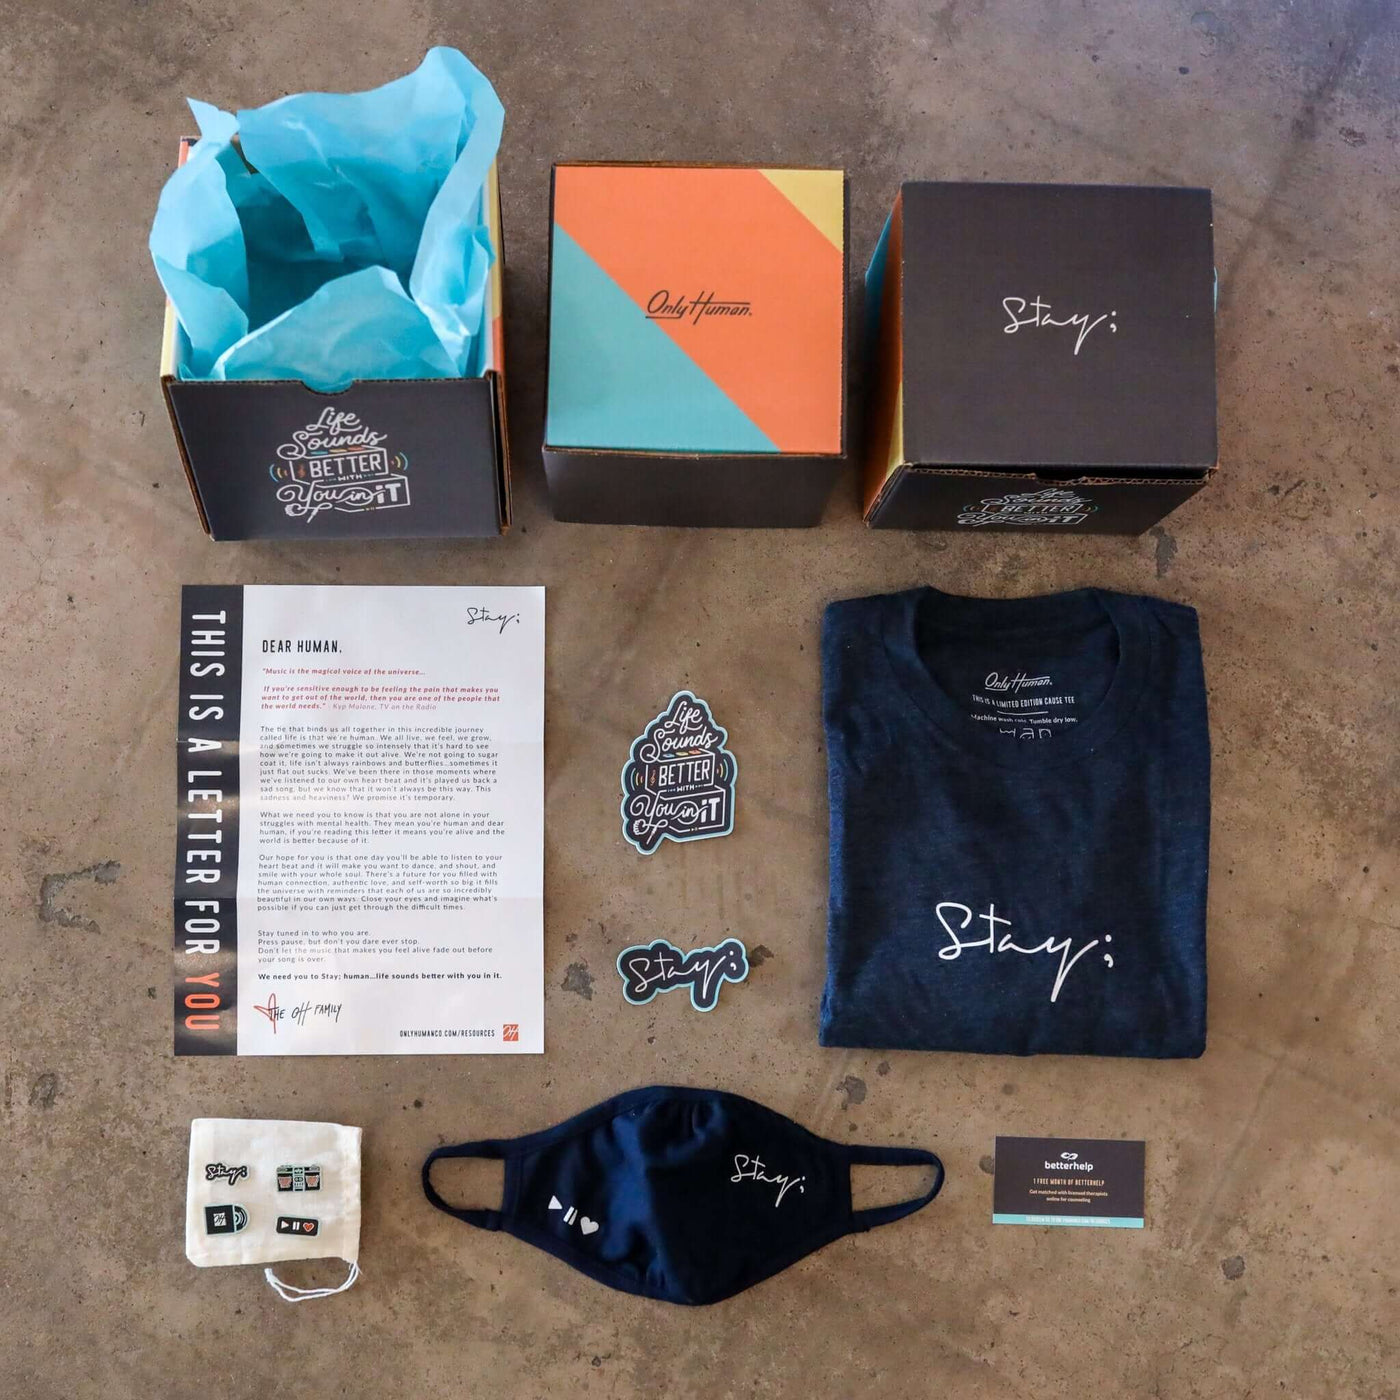 Stay; 2020 Cause Box - Only Human